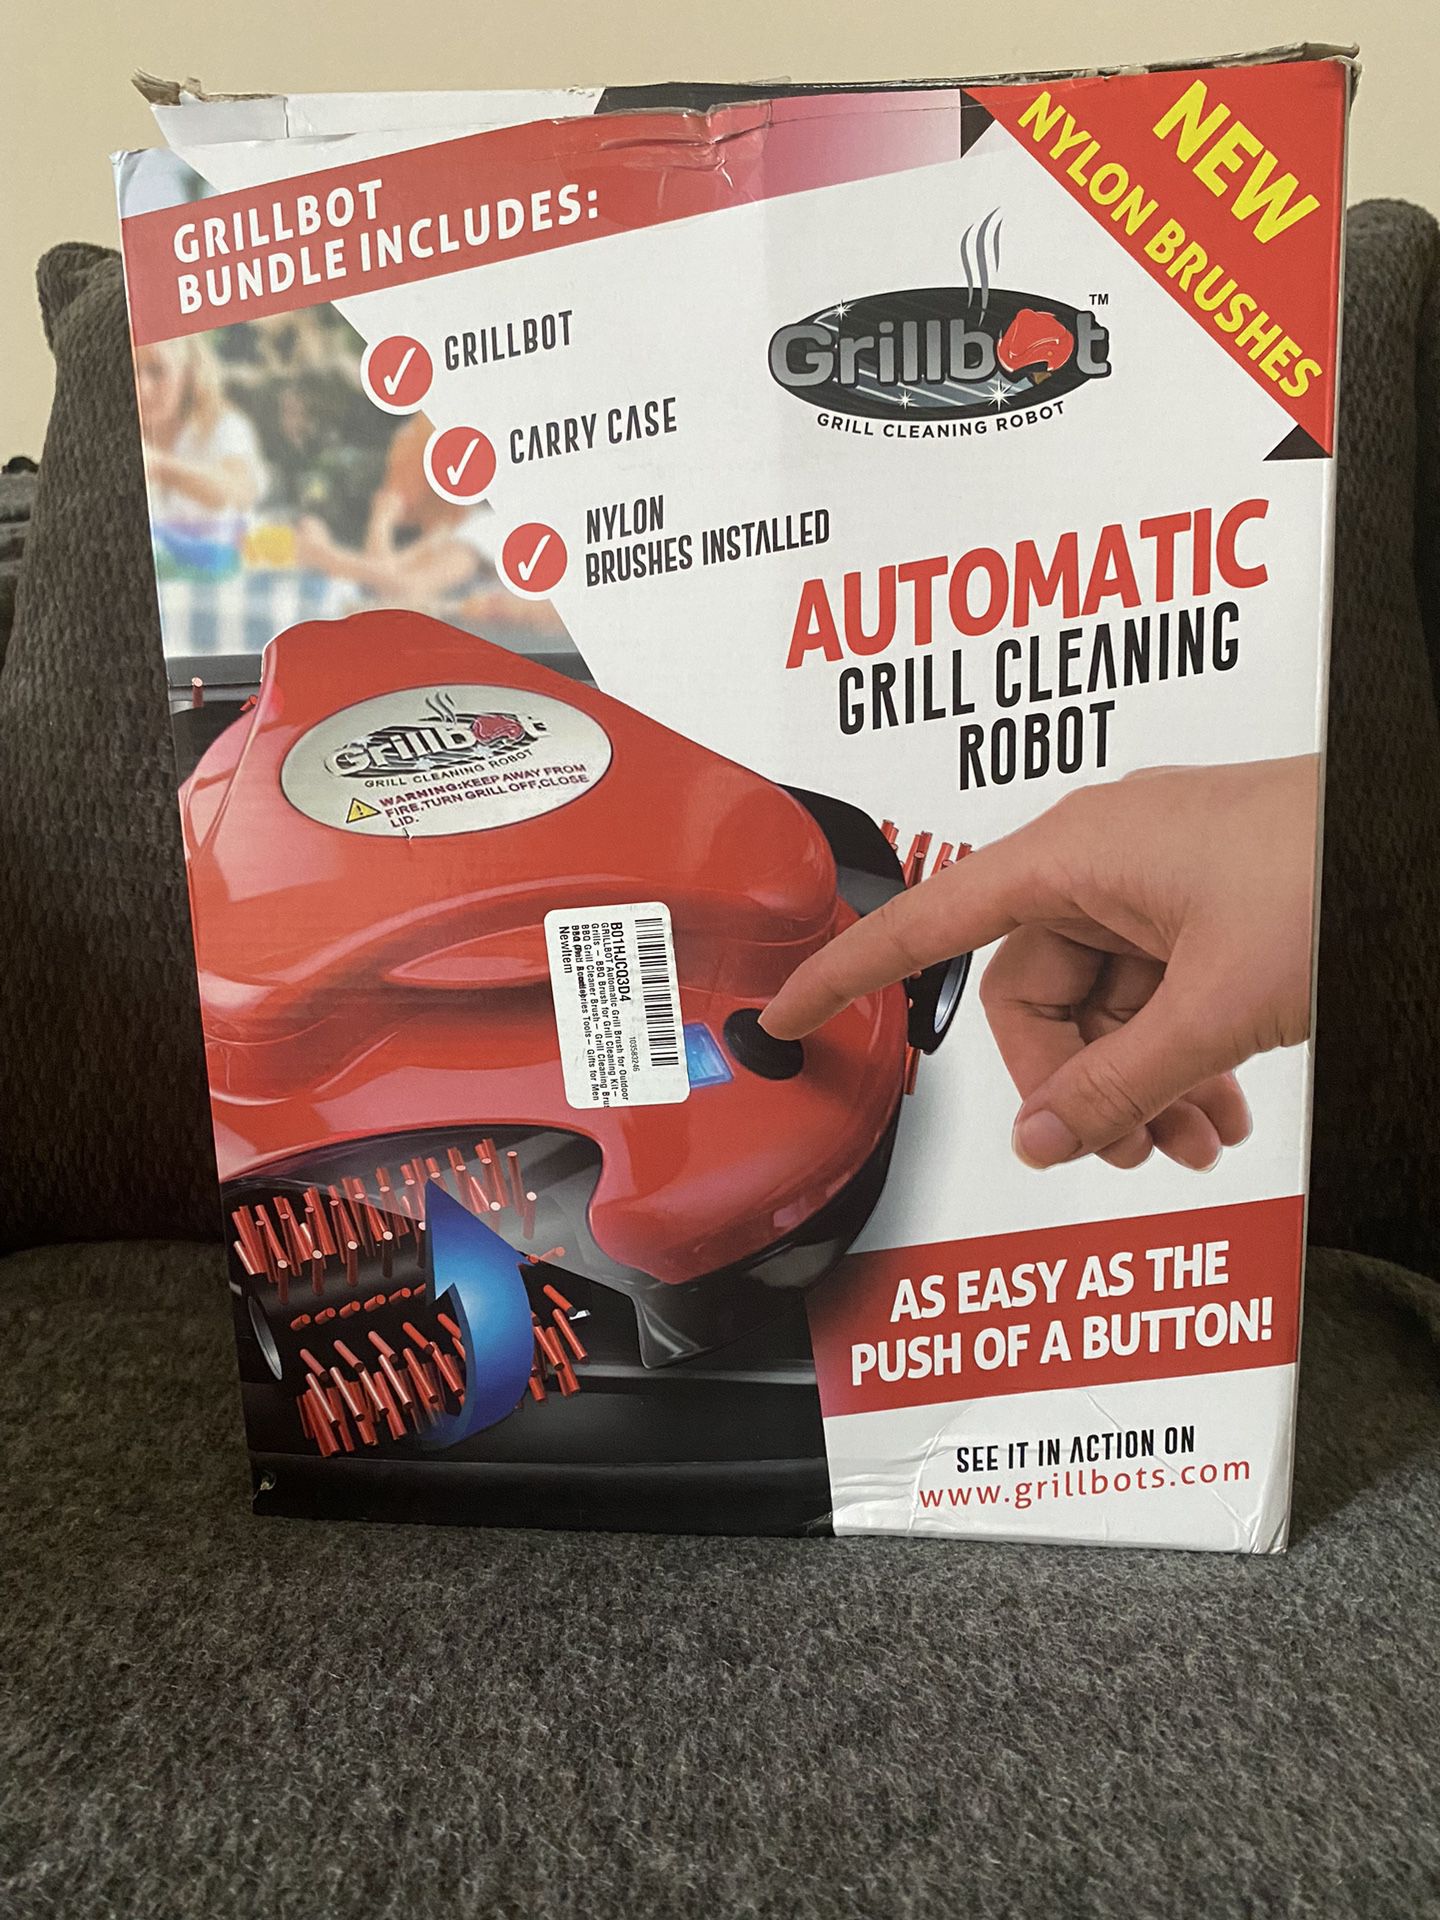 Grillbot Automatic Grill Cleaning Robot with Nylon Brushes - BBQ Grill  Cleaner - for Sale in Bakersfield, CA - OfferUp